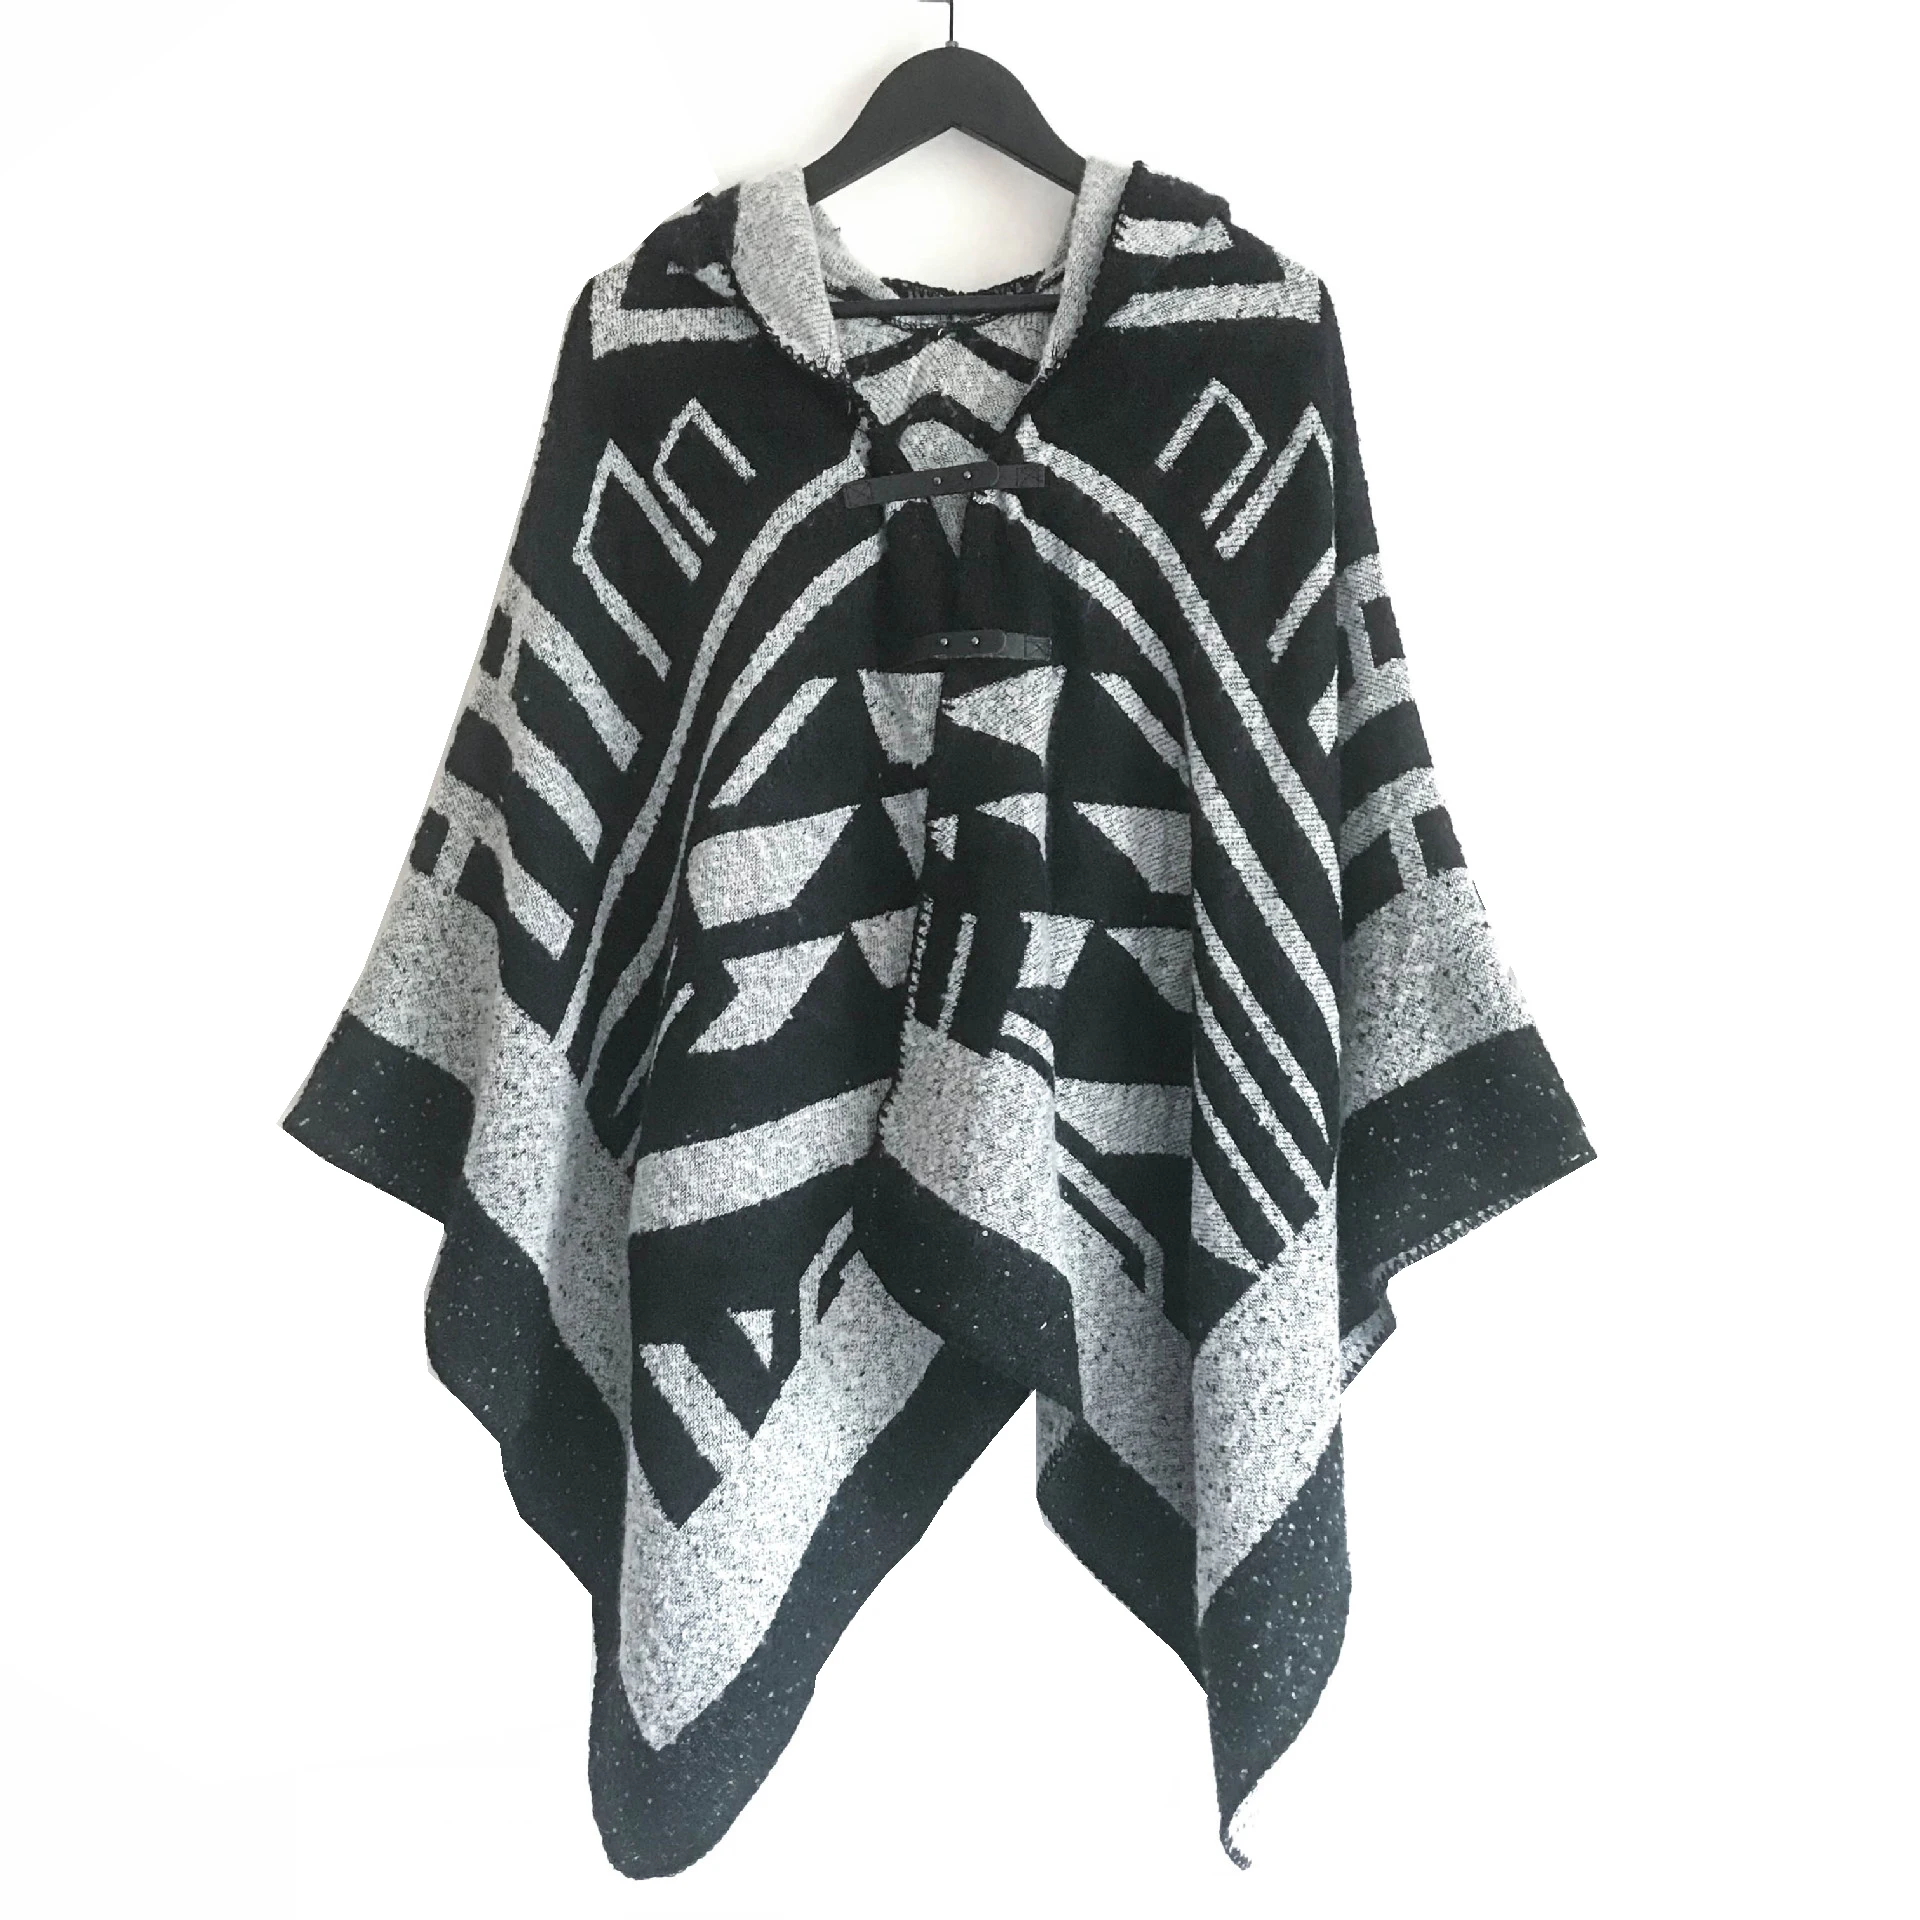 CHENKIO Womens Vintage Boho Knitted Poncho Shawl Cape Button Cardigan with Hood Scarves and Shawls Designer Clothes Women Luxury chenkio women s winter scarf tassel plaid scarf chunky blanket scarves thick large wrap shawl luxury scarf women designer scarf